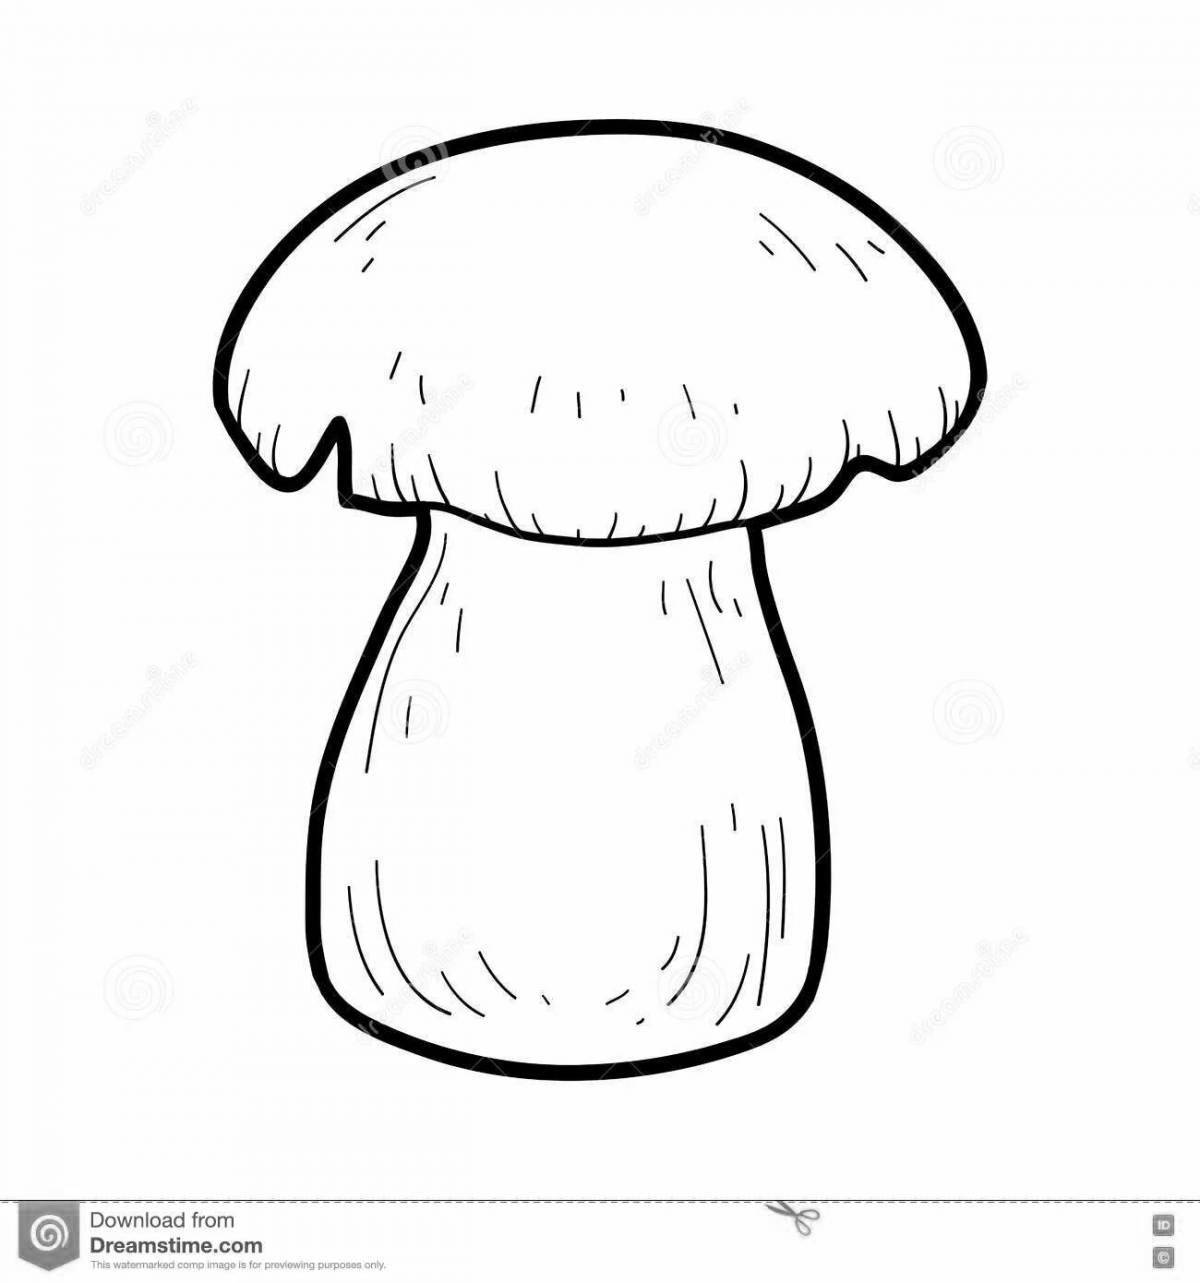 Coloring pages with porcini mushrooms for children